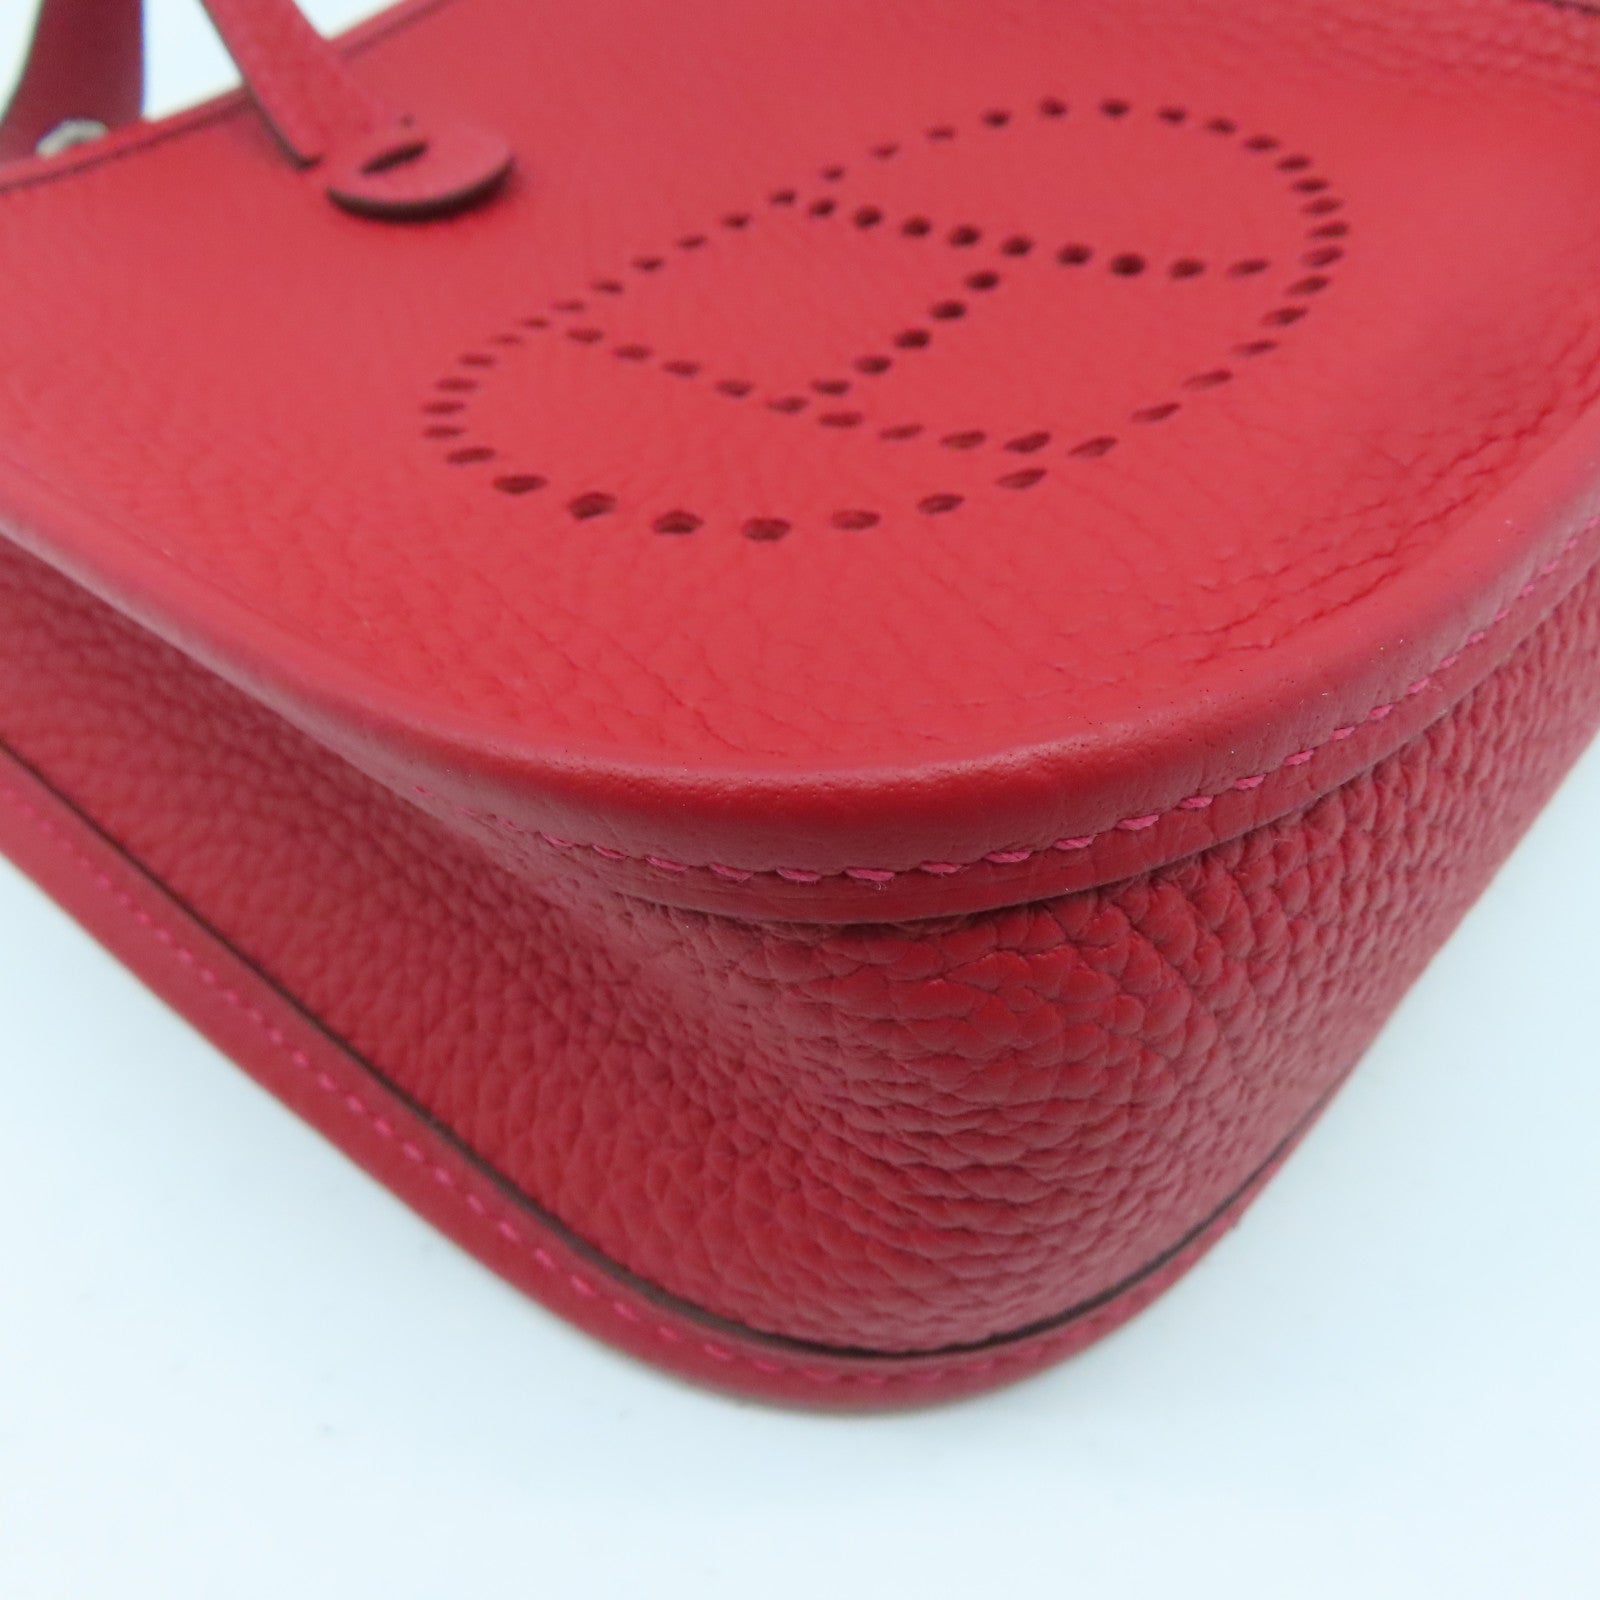 Hermès Clemence Evelyne TPM Red Leather Pony-style calfskin ref